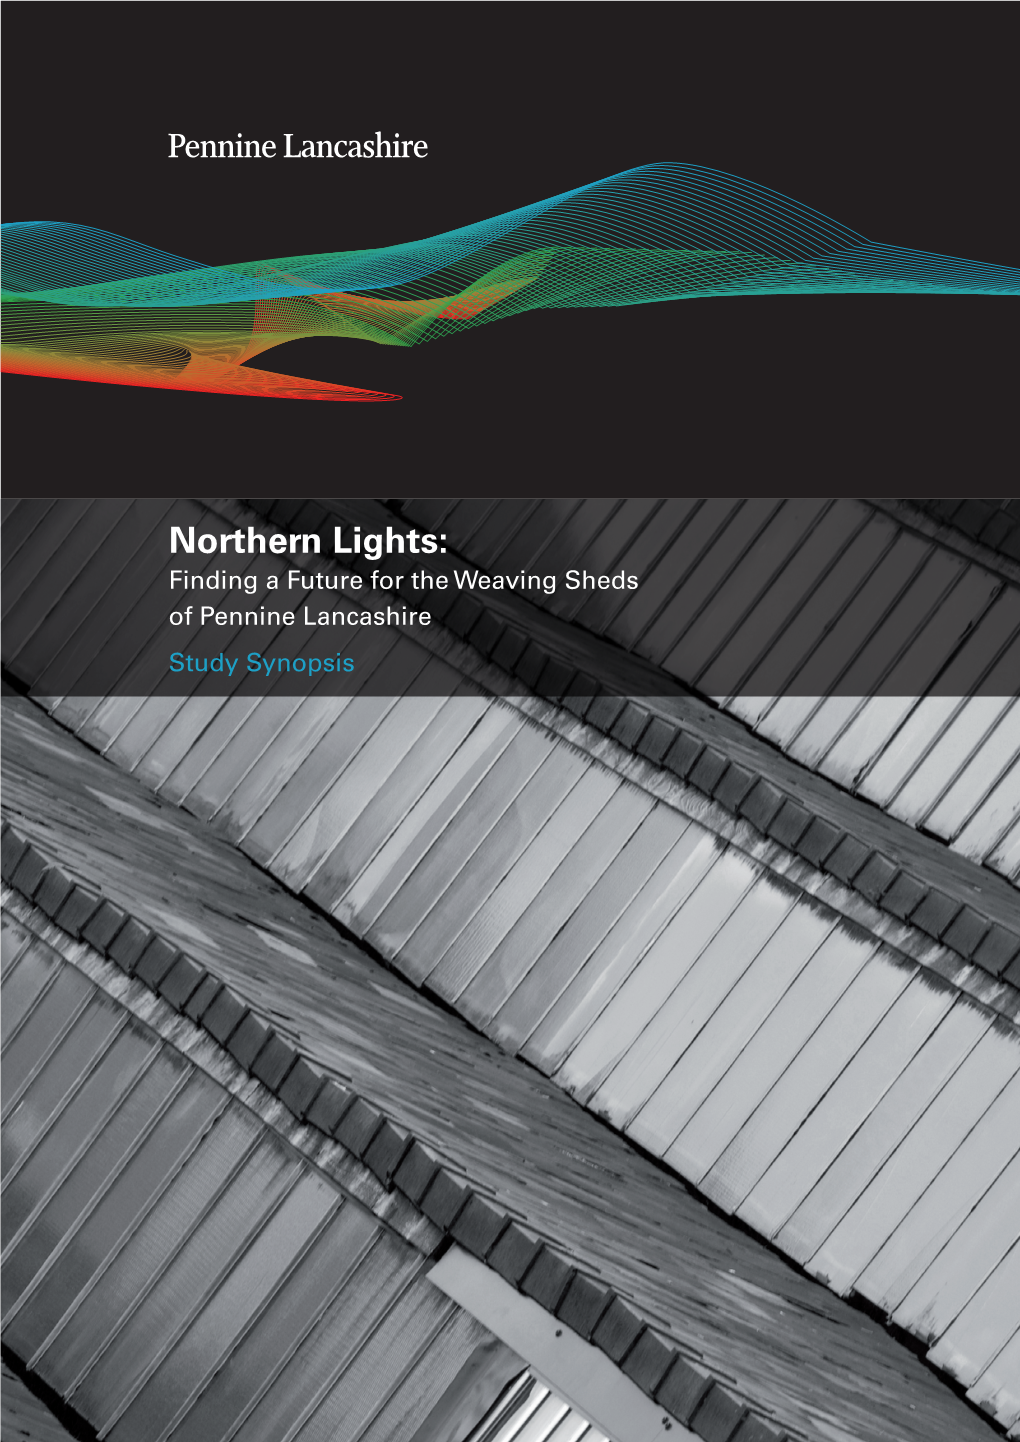 Northern Lights: Finding a Future for the Weaving Sheds of Pennine Lancashire Study Synopsis P2